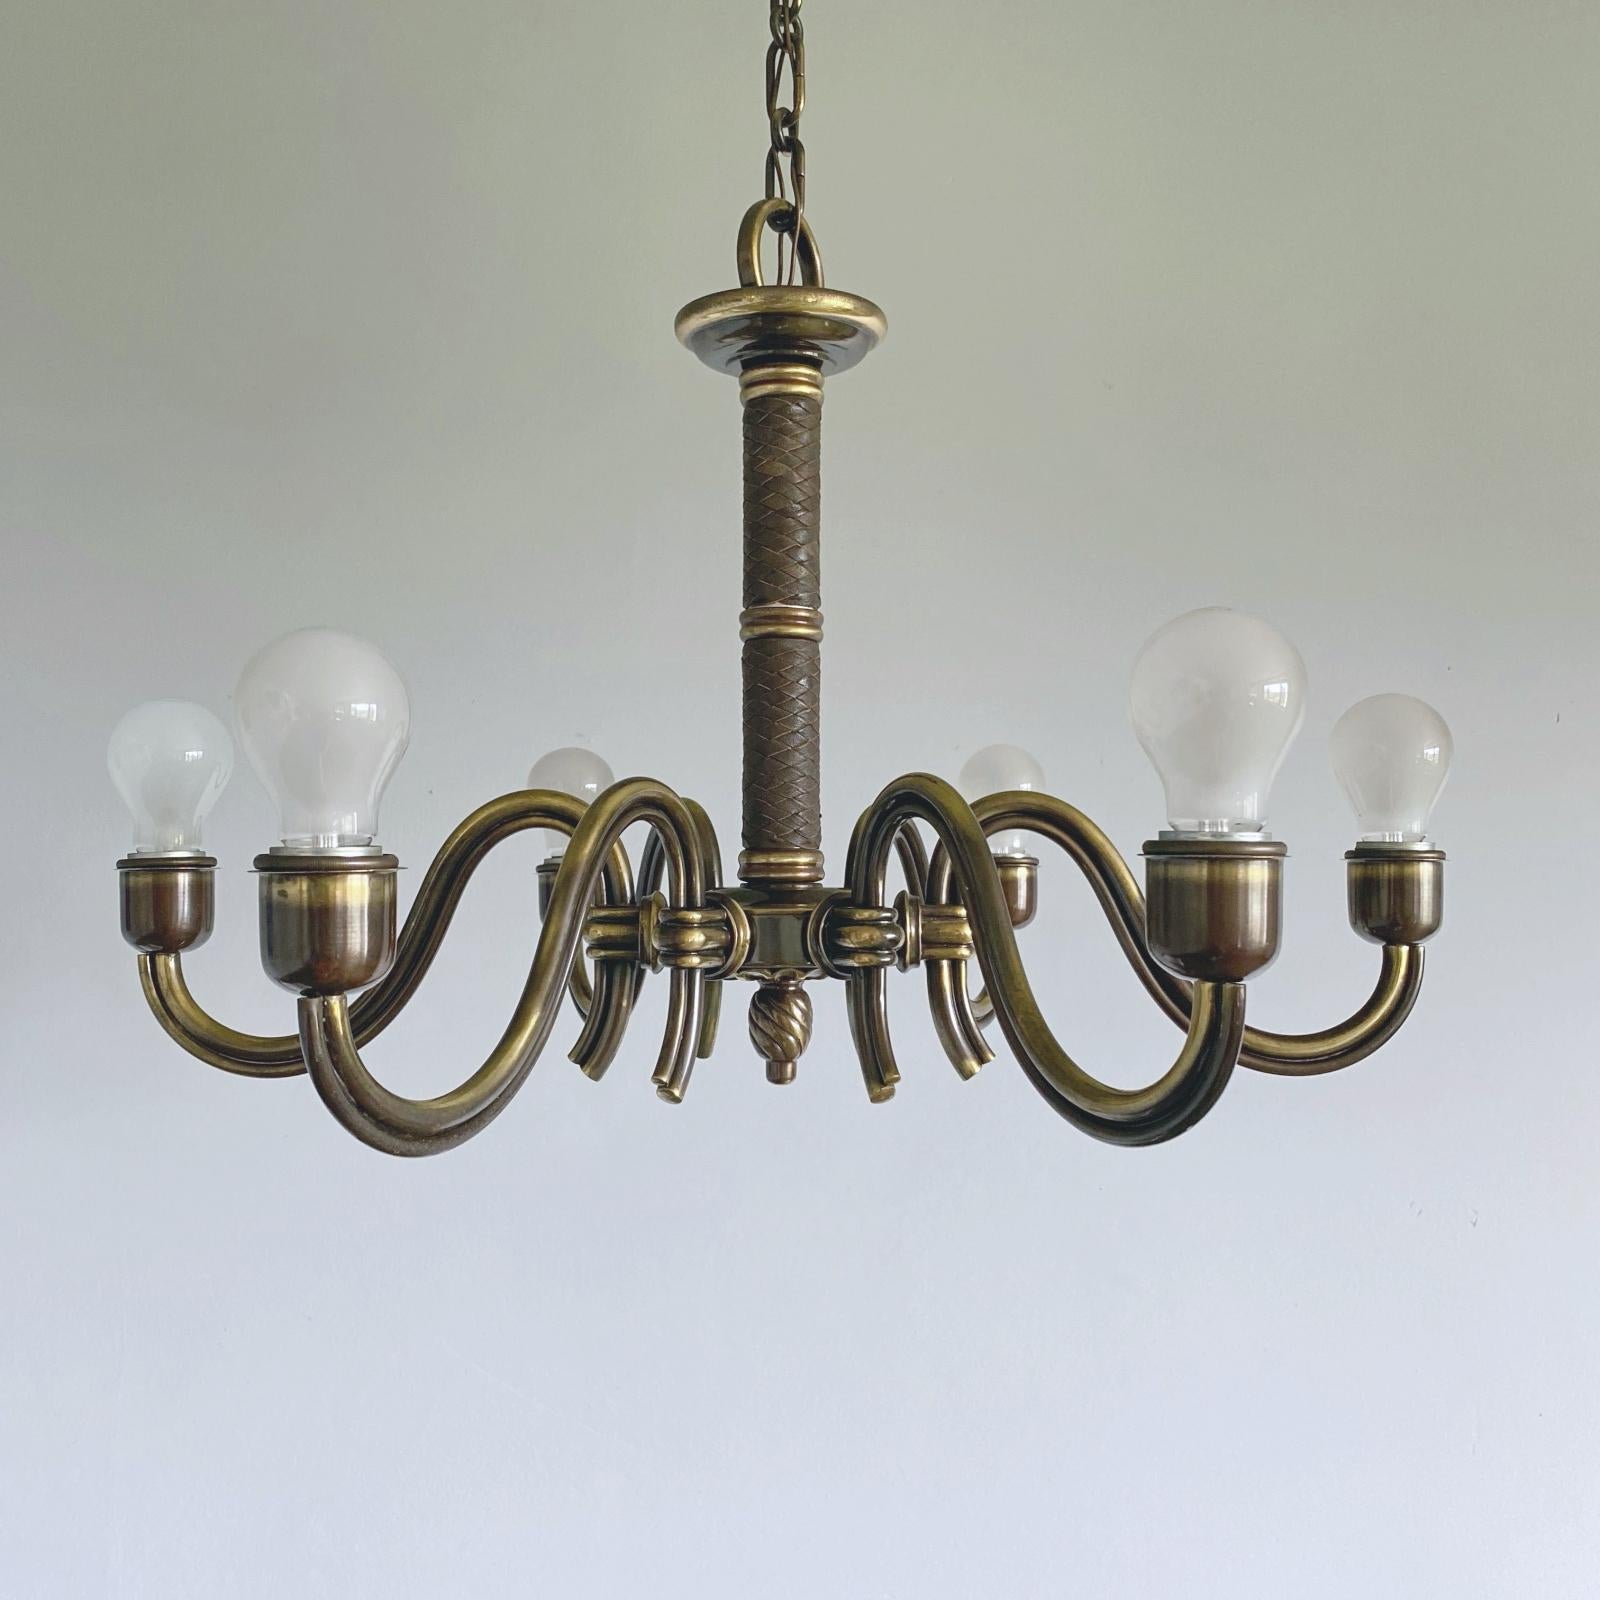 Very rare and elegant Viennese Modern Age bronzed brass chandelier designed by Professor Hugo Gorge and manufactured by Melzer & Neuhardt in Vienna, Austria. Prof. Hugo Gorge was one of the founders of Viennese Modern, together with Adolf Loos,